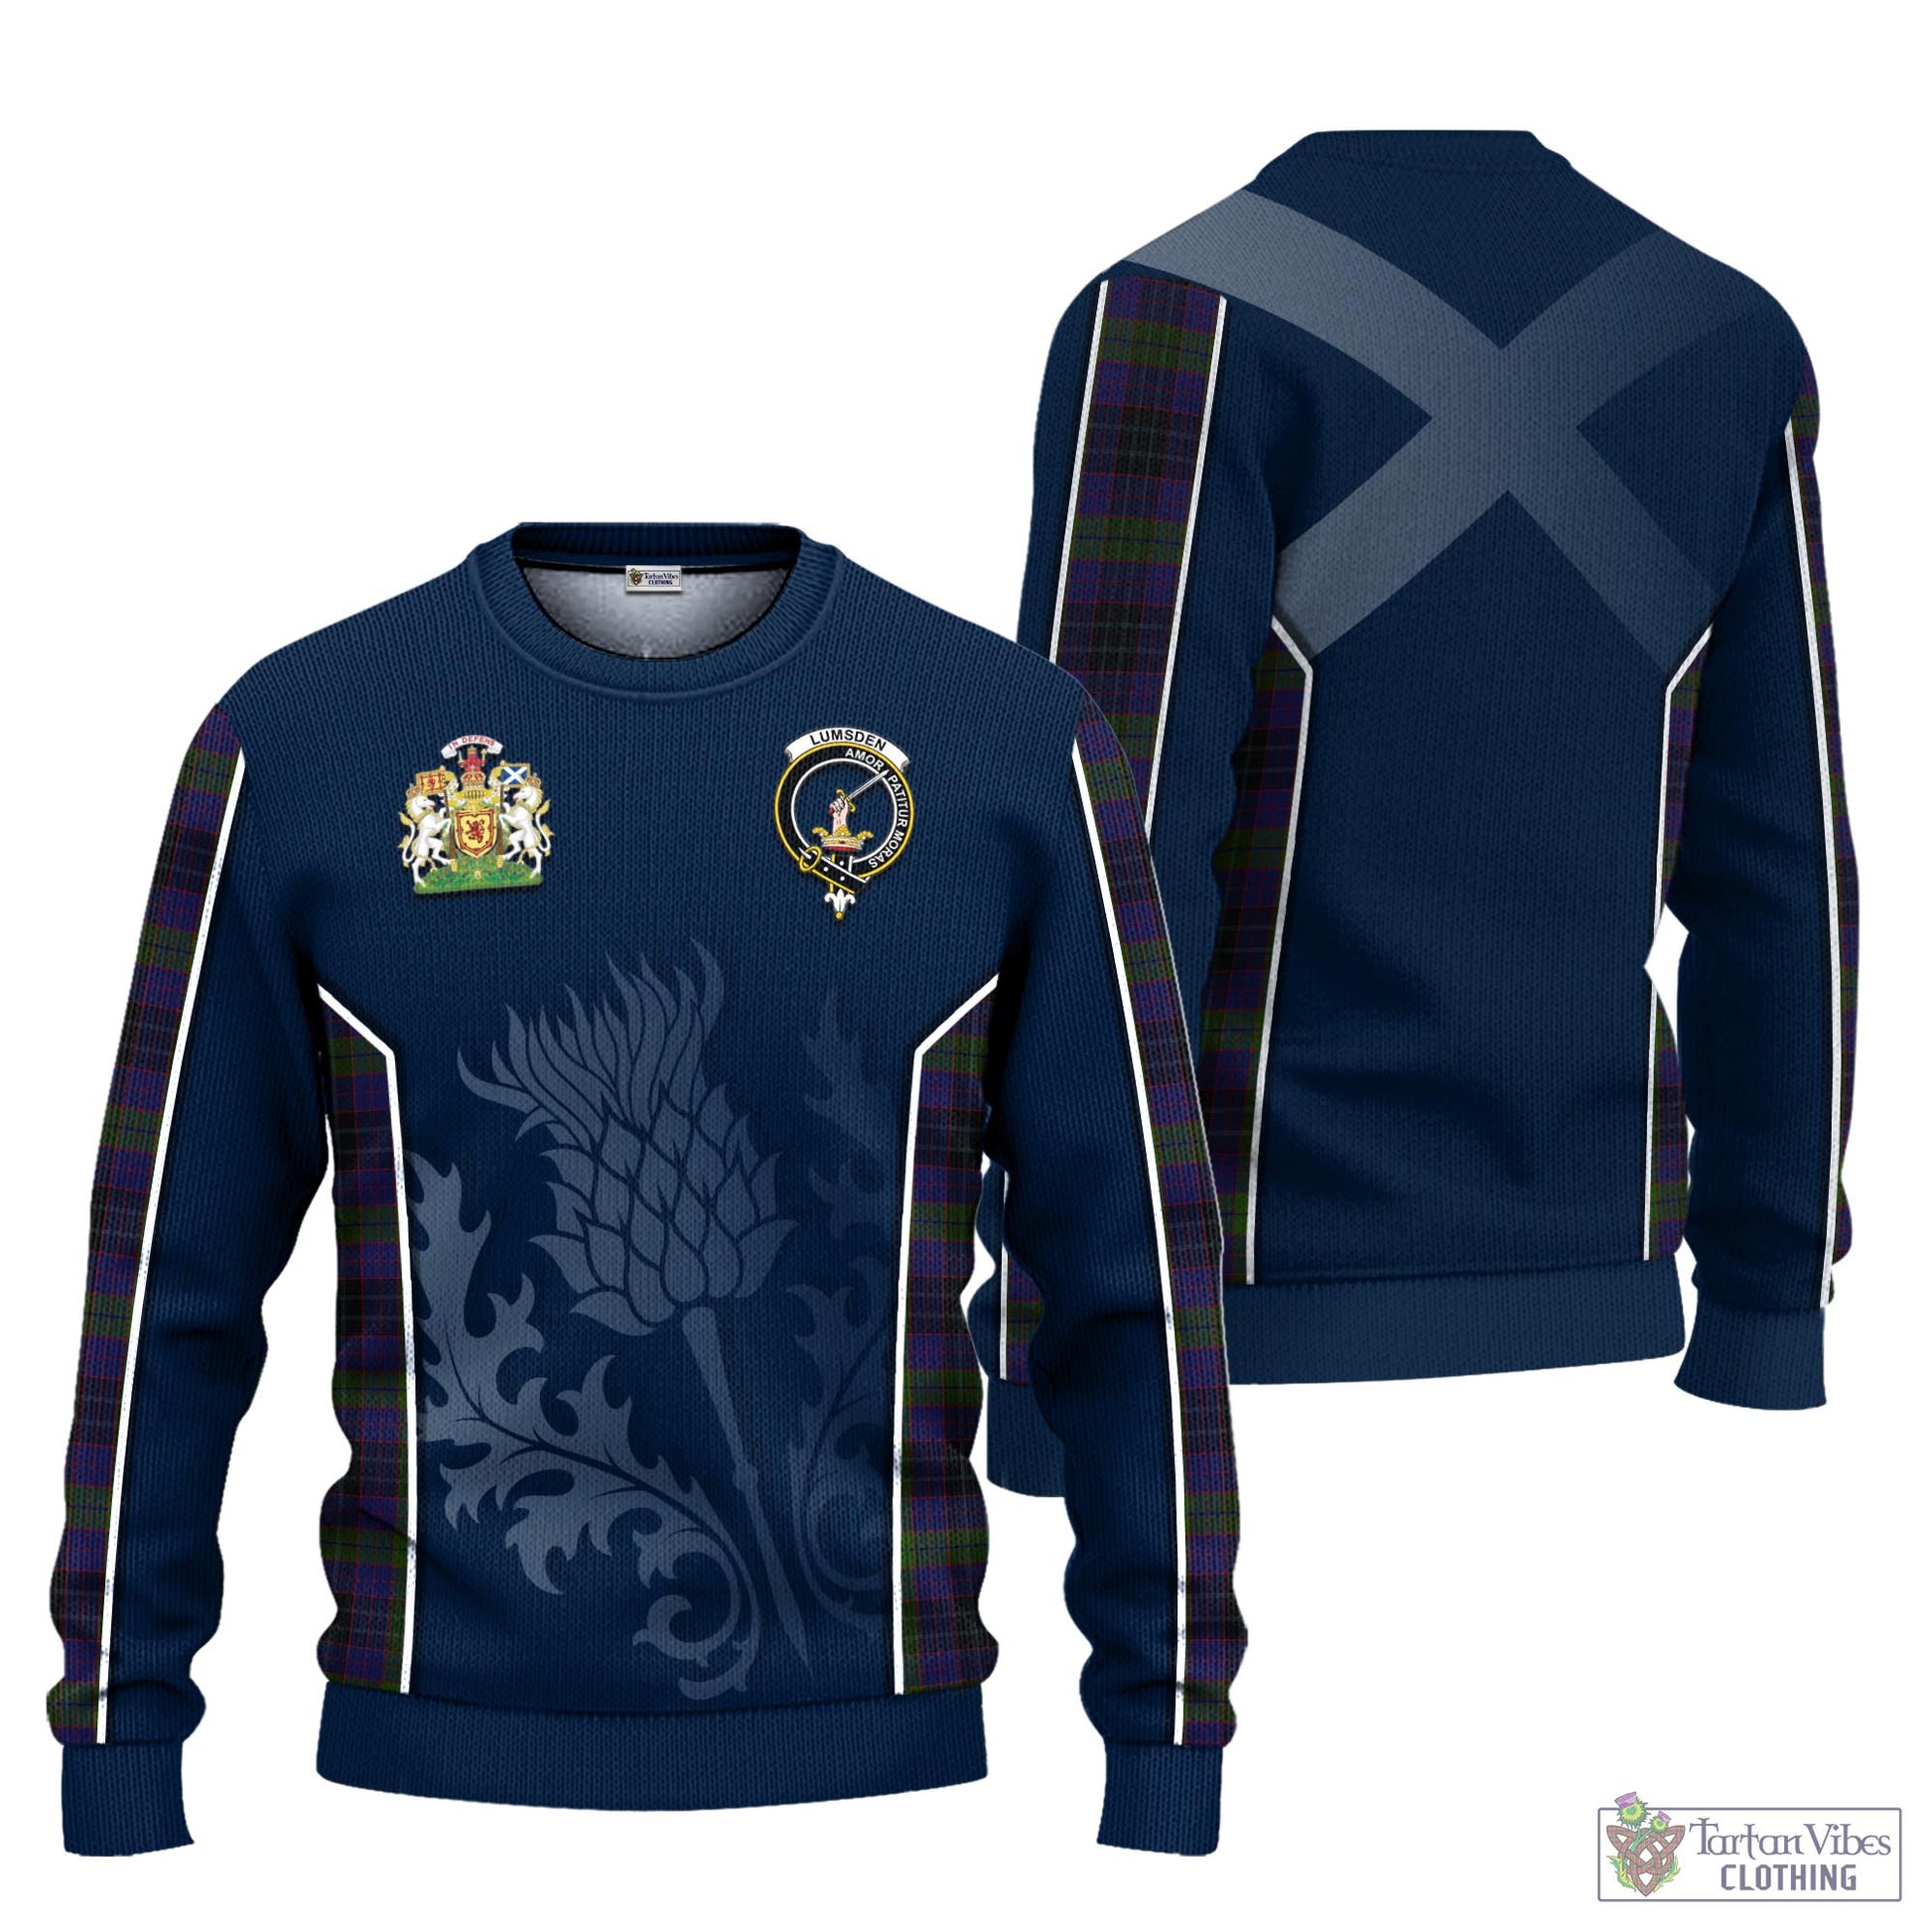 Tartan Vibes Clothing Lumsden Hunting Tartan Knitted Sweatshirt with Family Crest and Scottish Thistle Vibes Sport Style